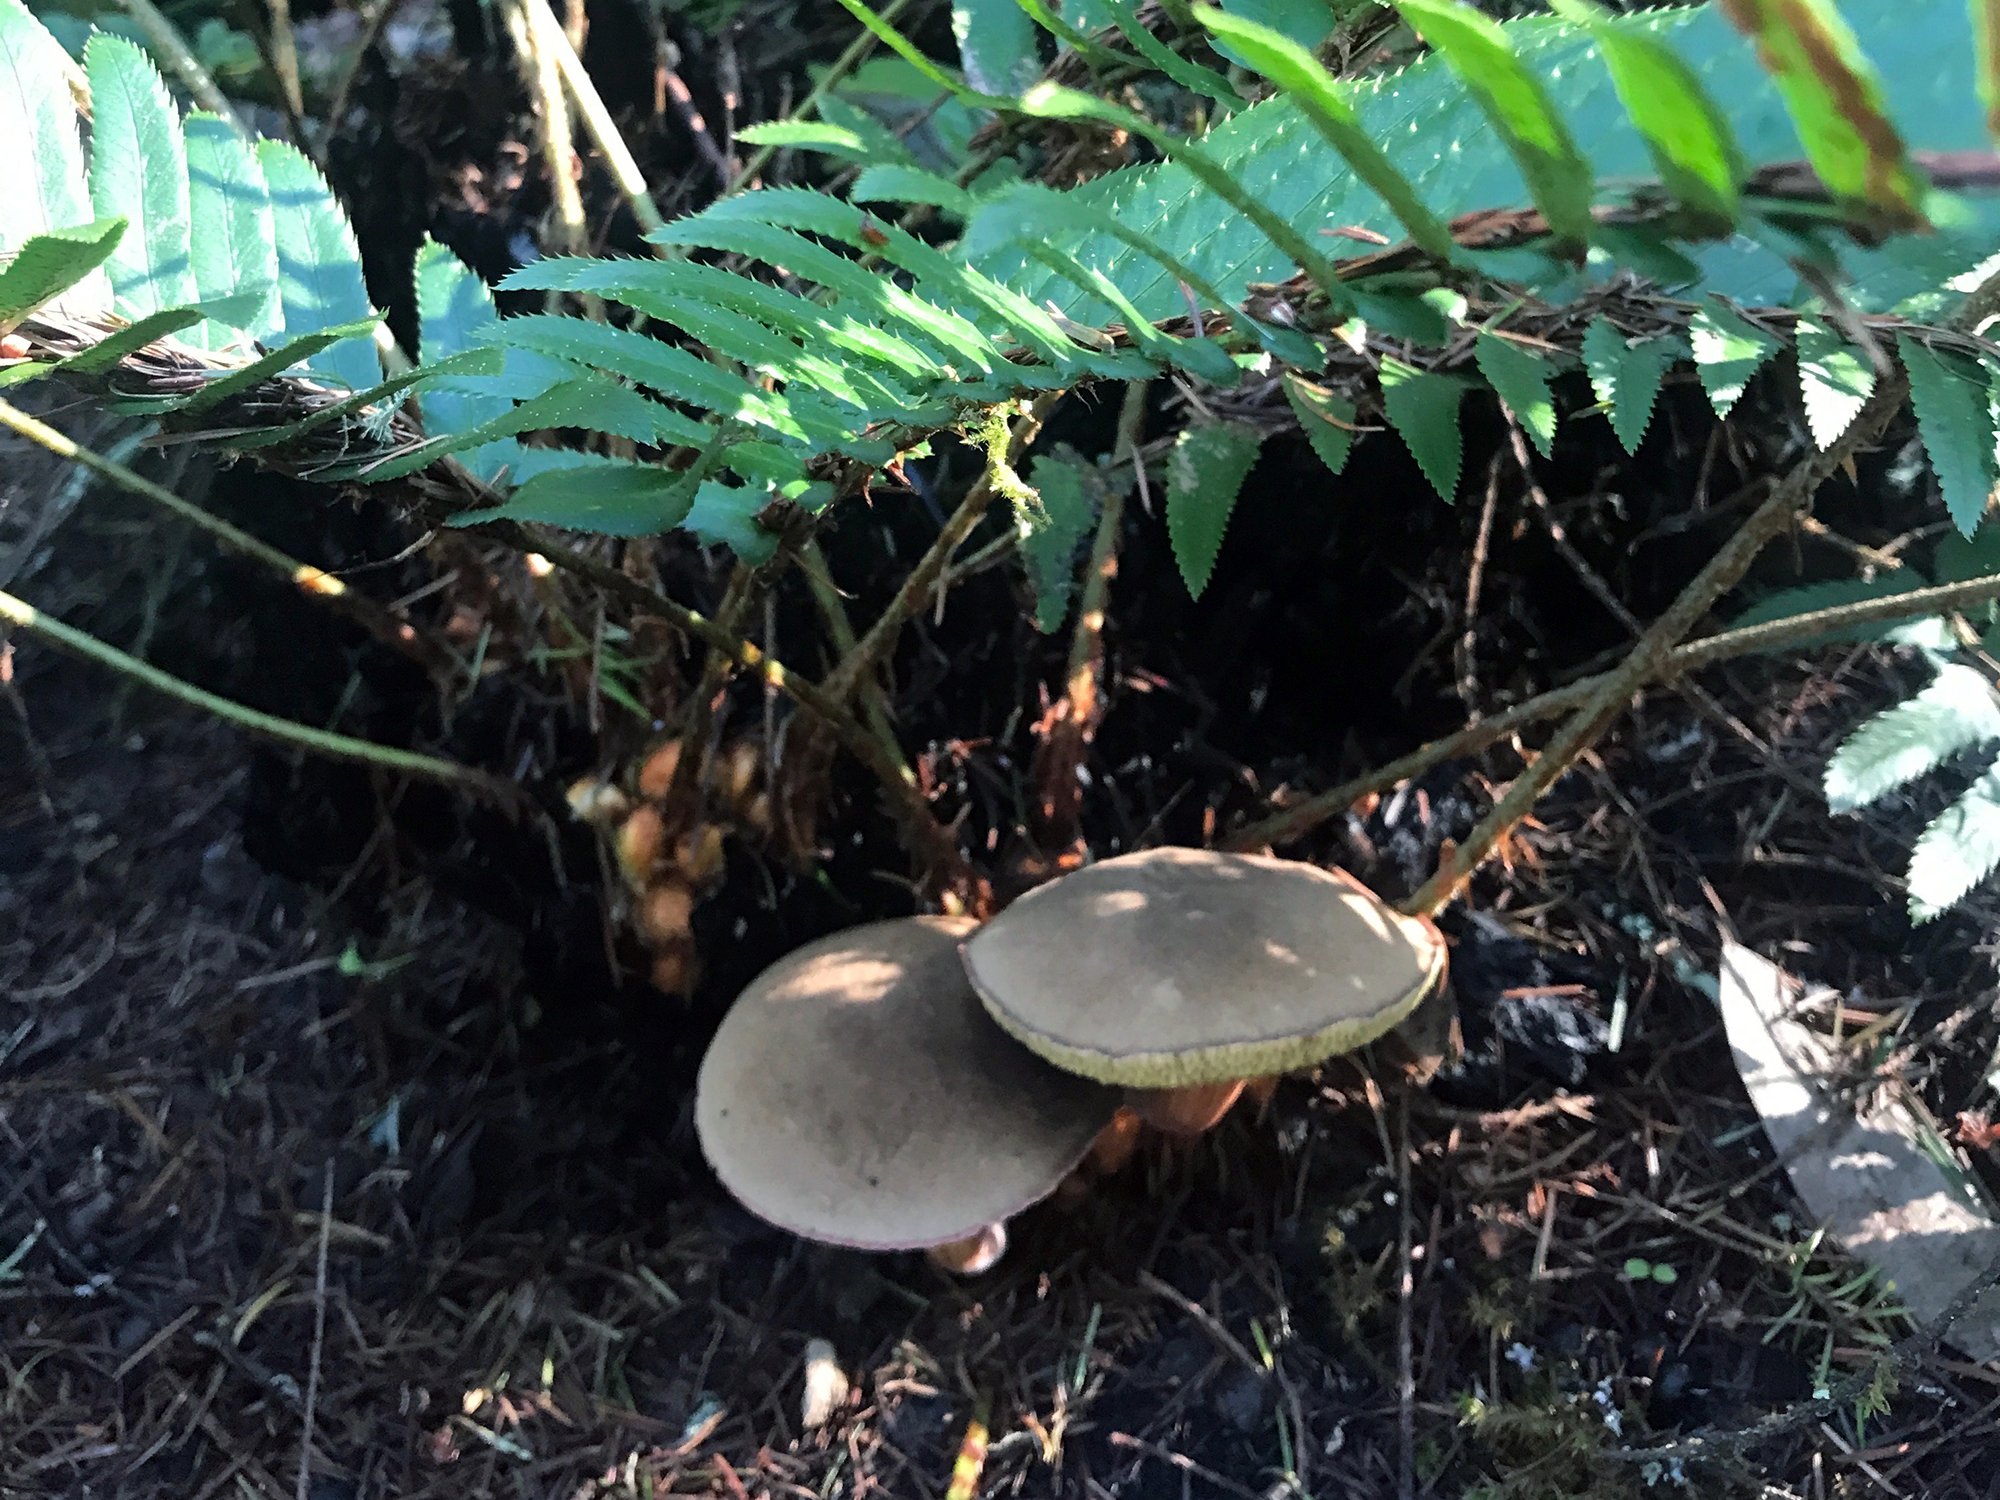 Bolete mushrooms sprouting from a charred swordfern base